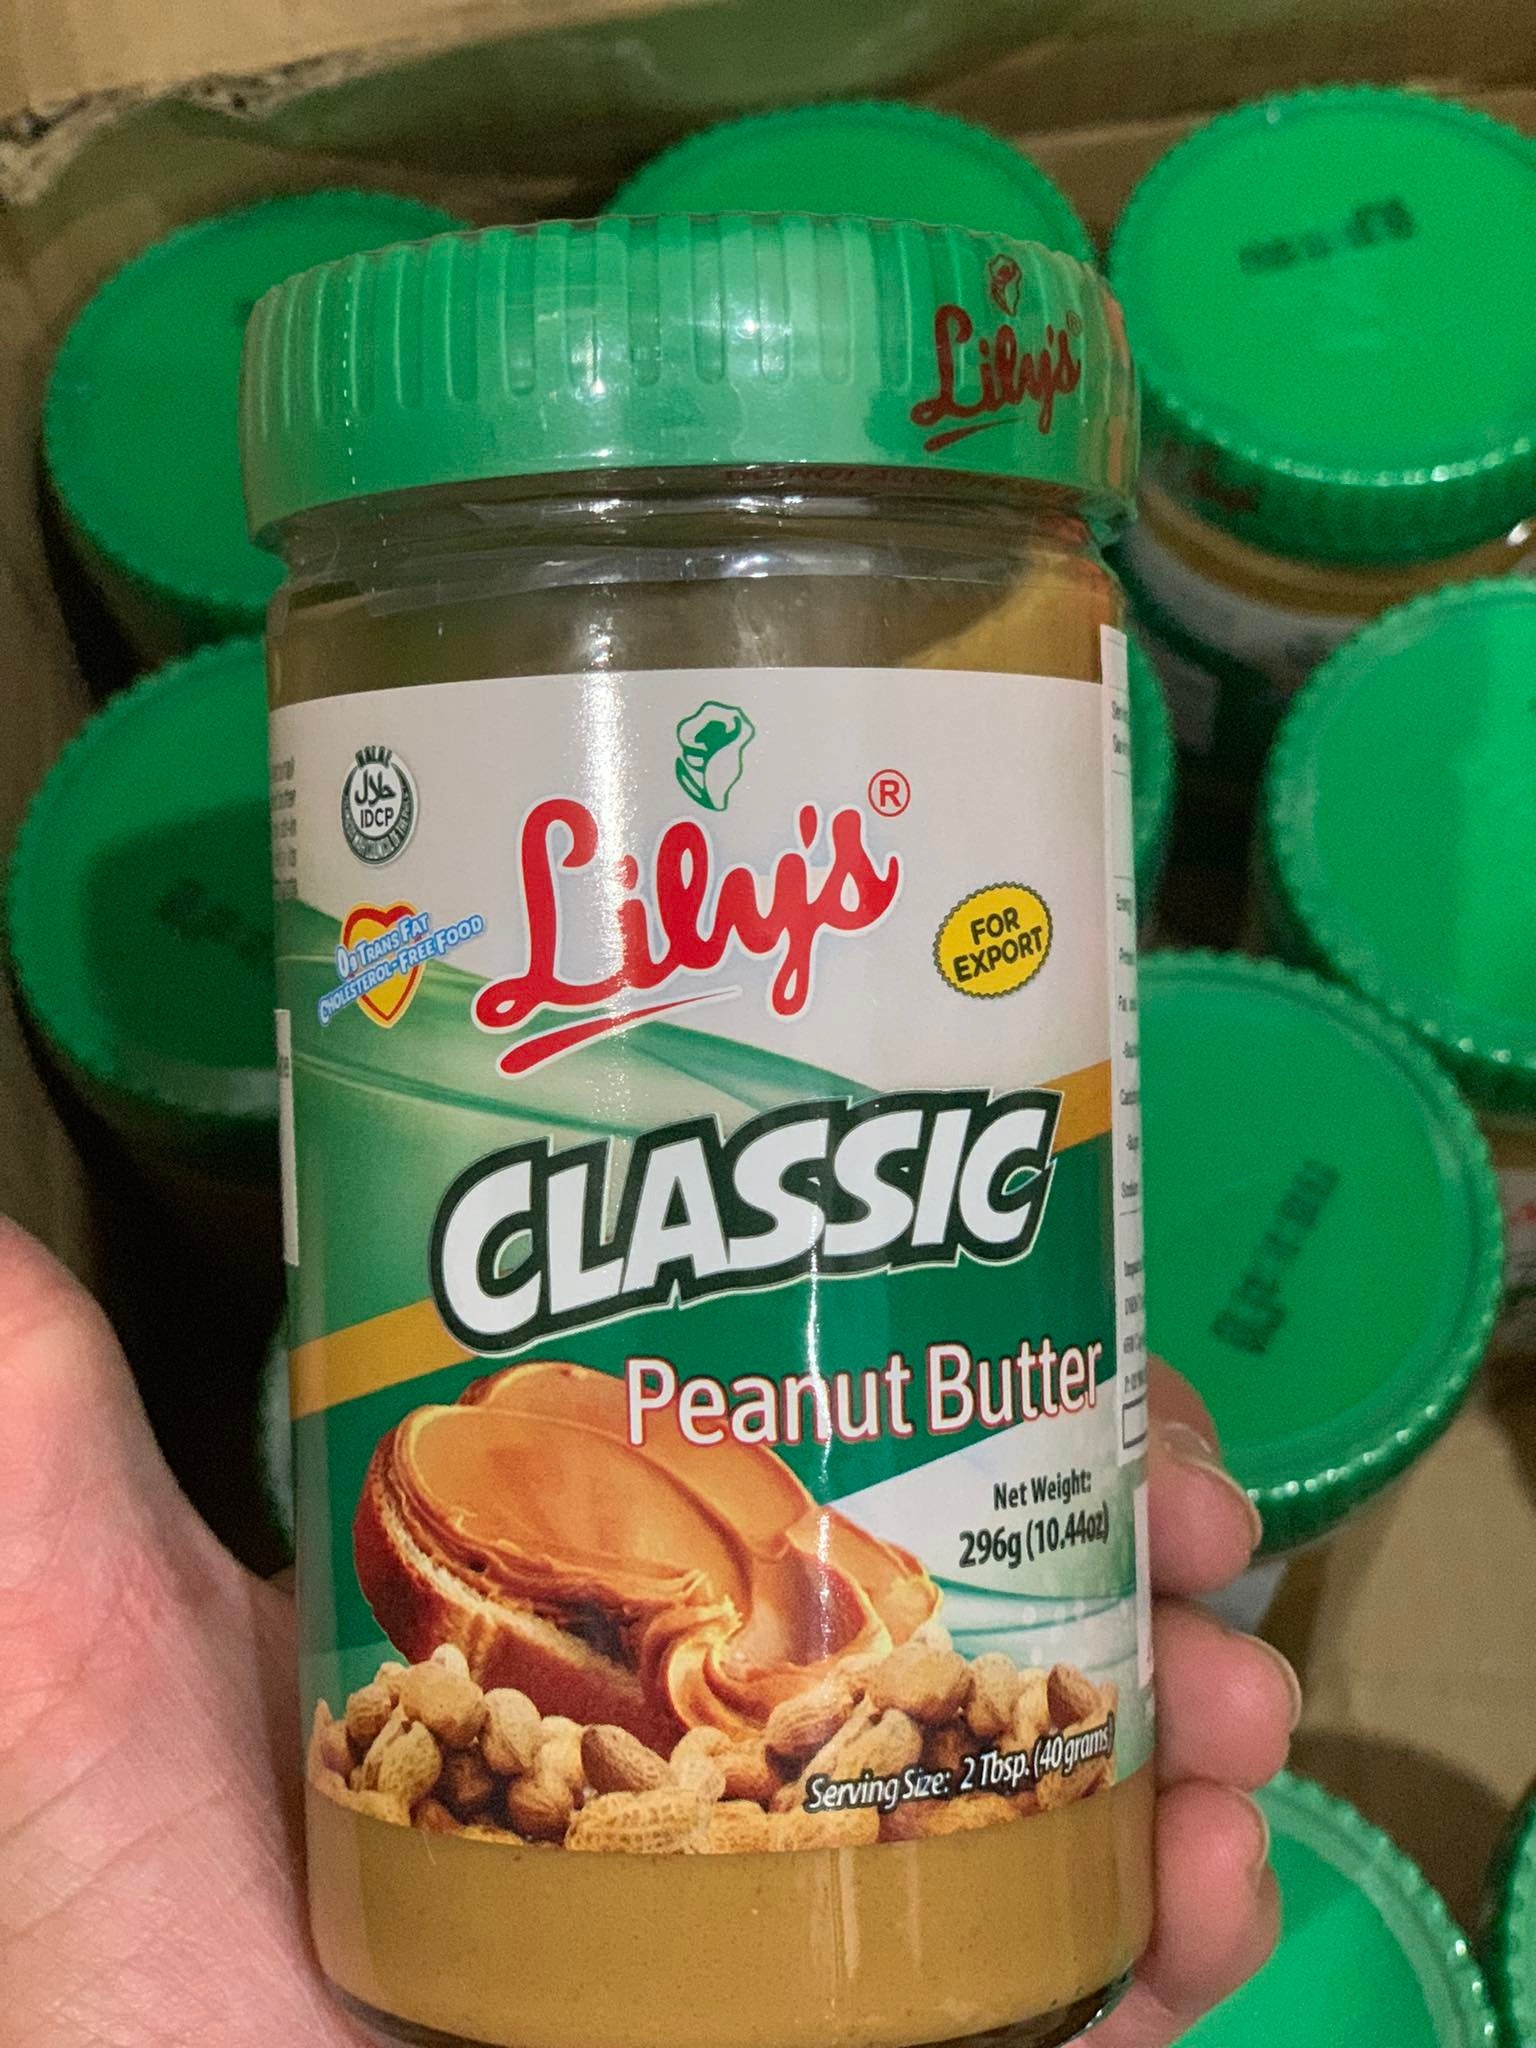 Lily's Classic Peanut Butter